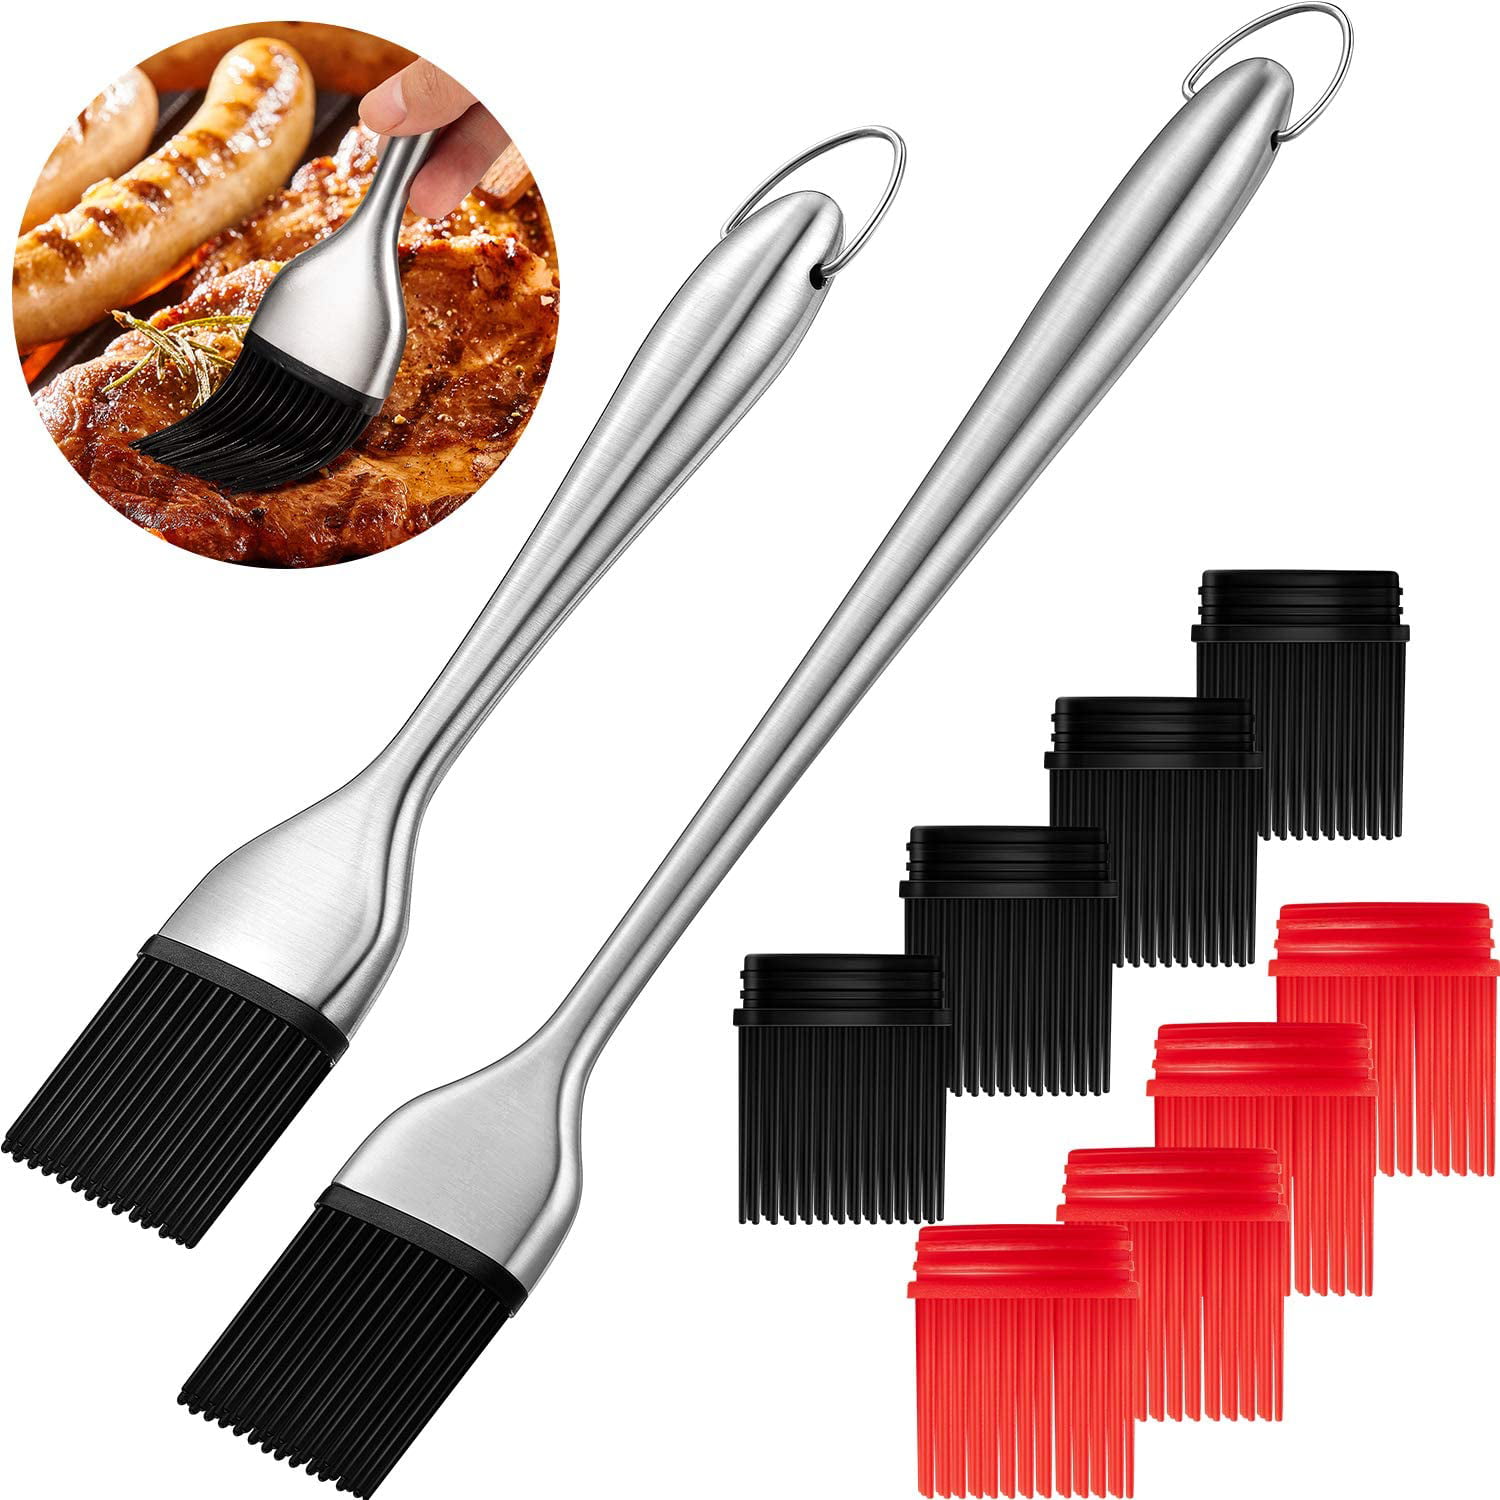 2x Basting Oil Brush Silicone Heat resistant Pastry Brushes for Grilling Baking. 